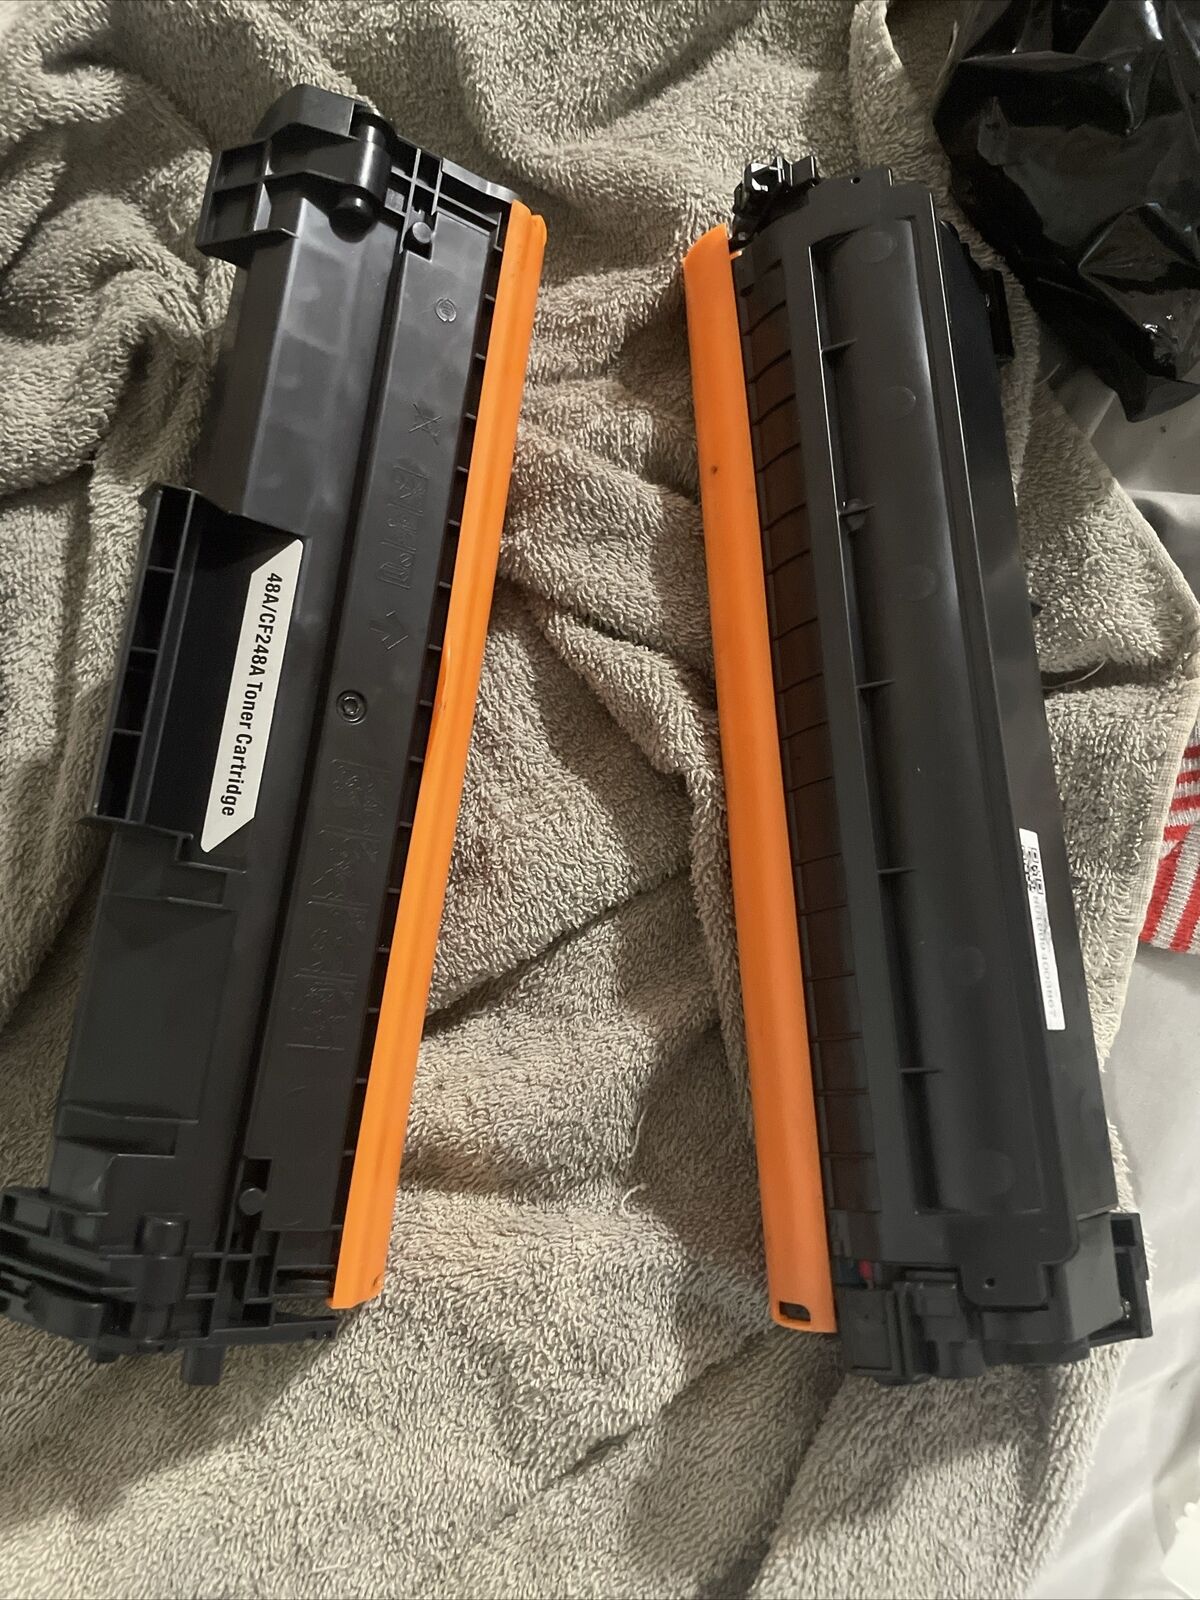 2x CF248A Black Toner One Of The Orange Covers Has A Crack In It. Still Works